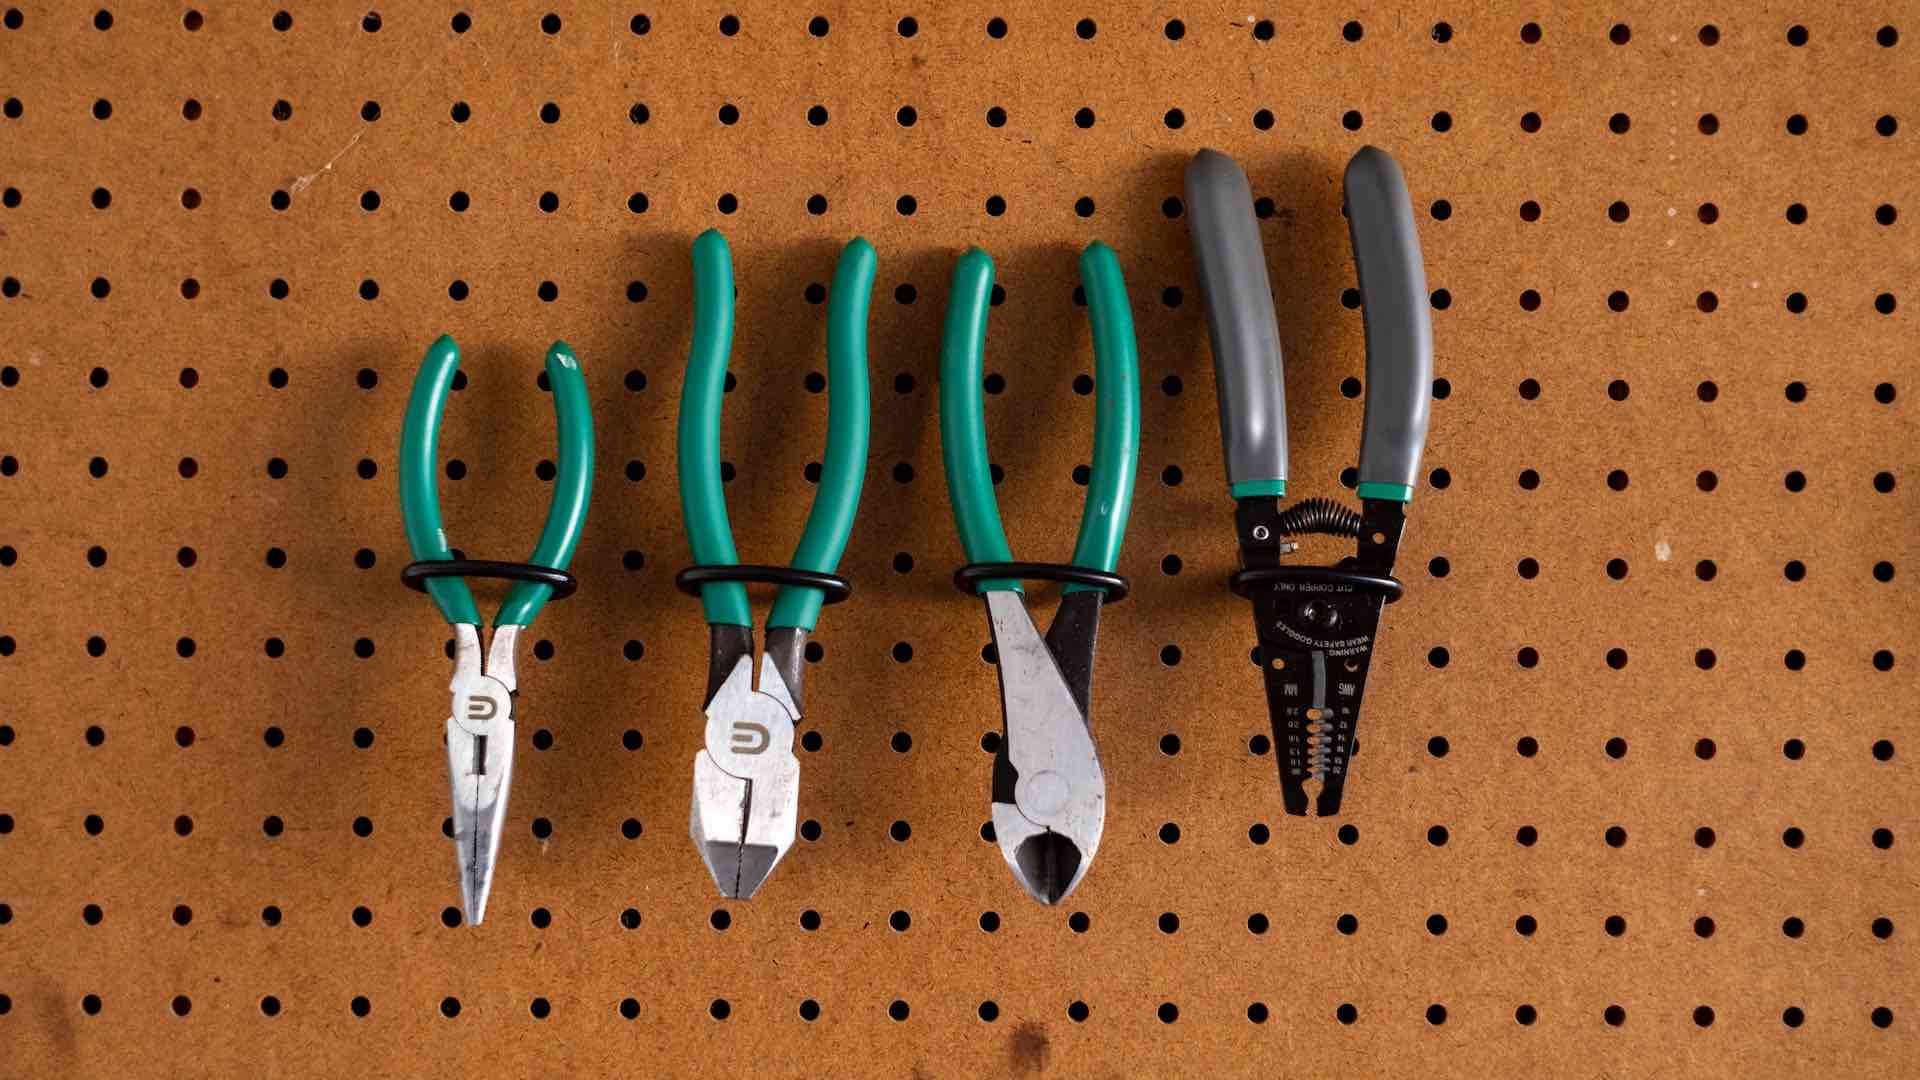 Different types of pliers